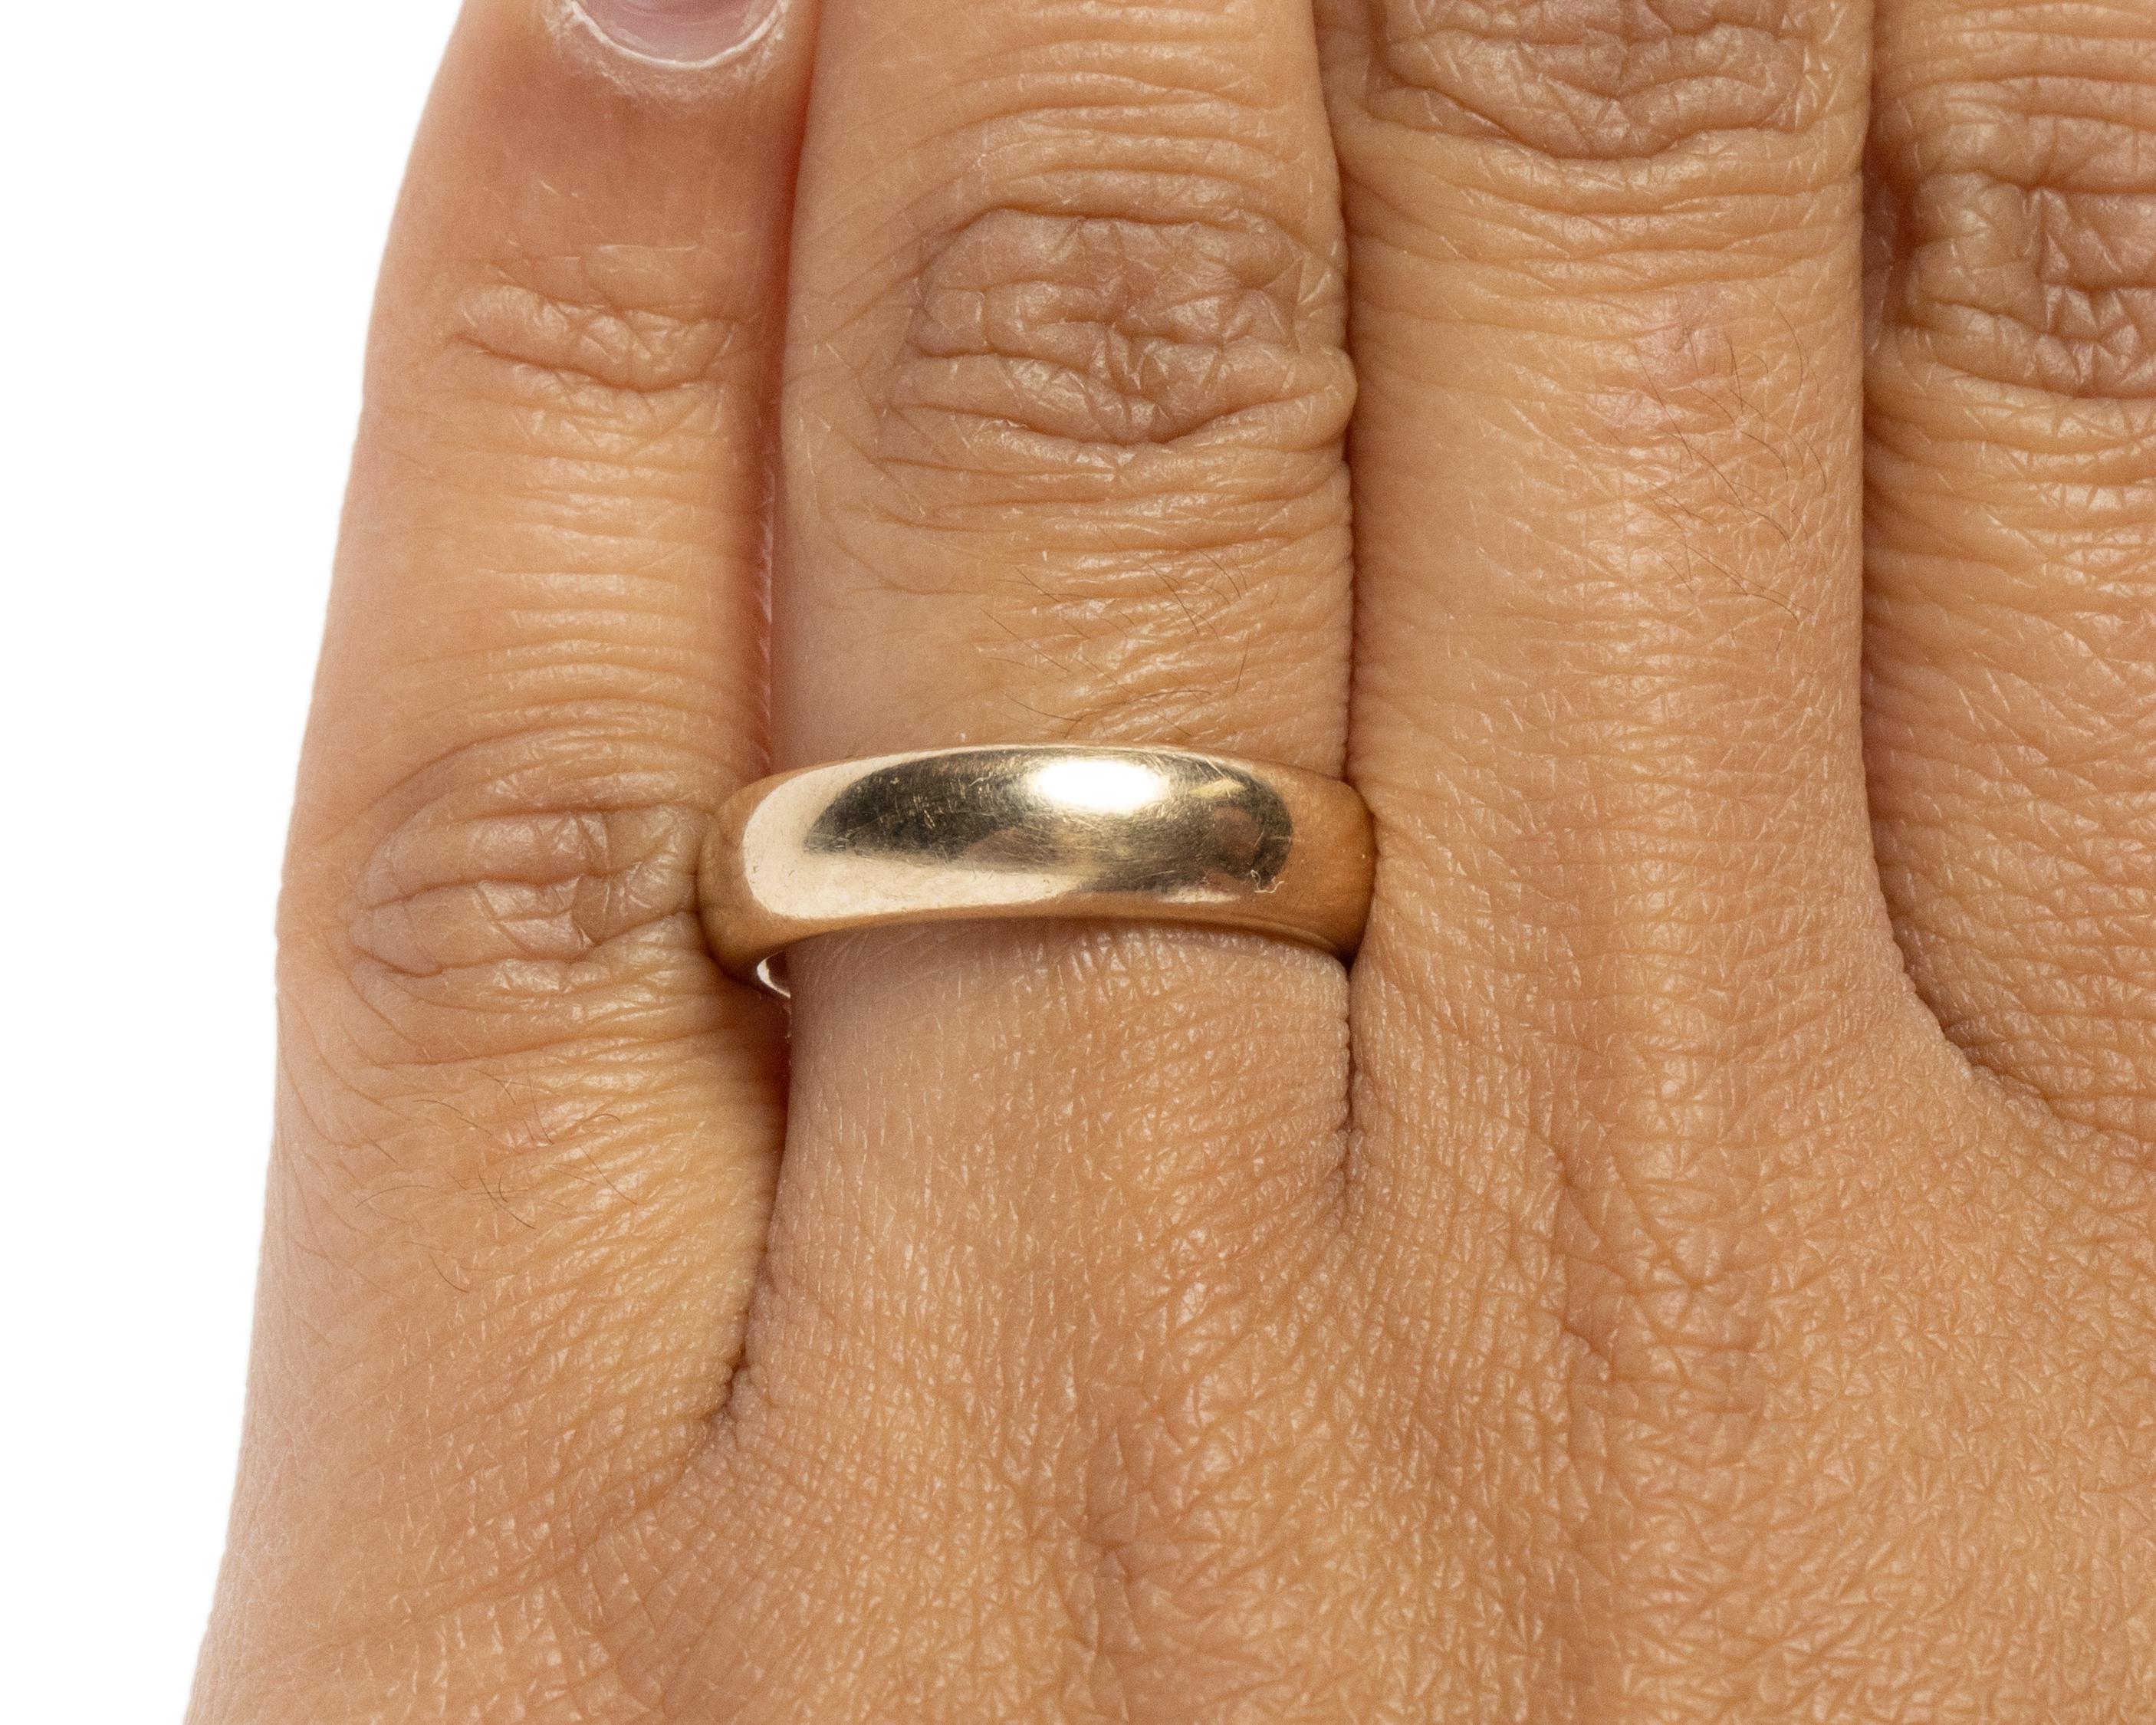 Here we have a beautiful unisex wedding band, a true classic. Crafted in 18K Yellow Gold this band has some heft, with a smooth finish. Perfect as a  addition to help you say 